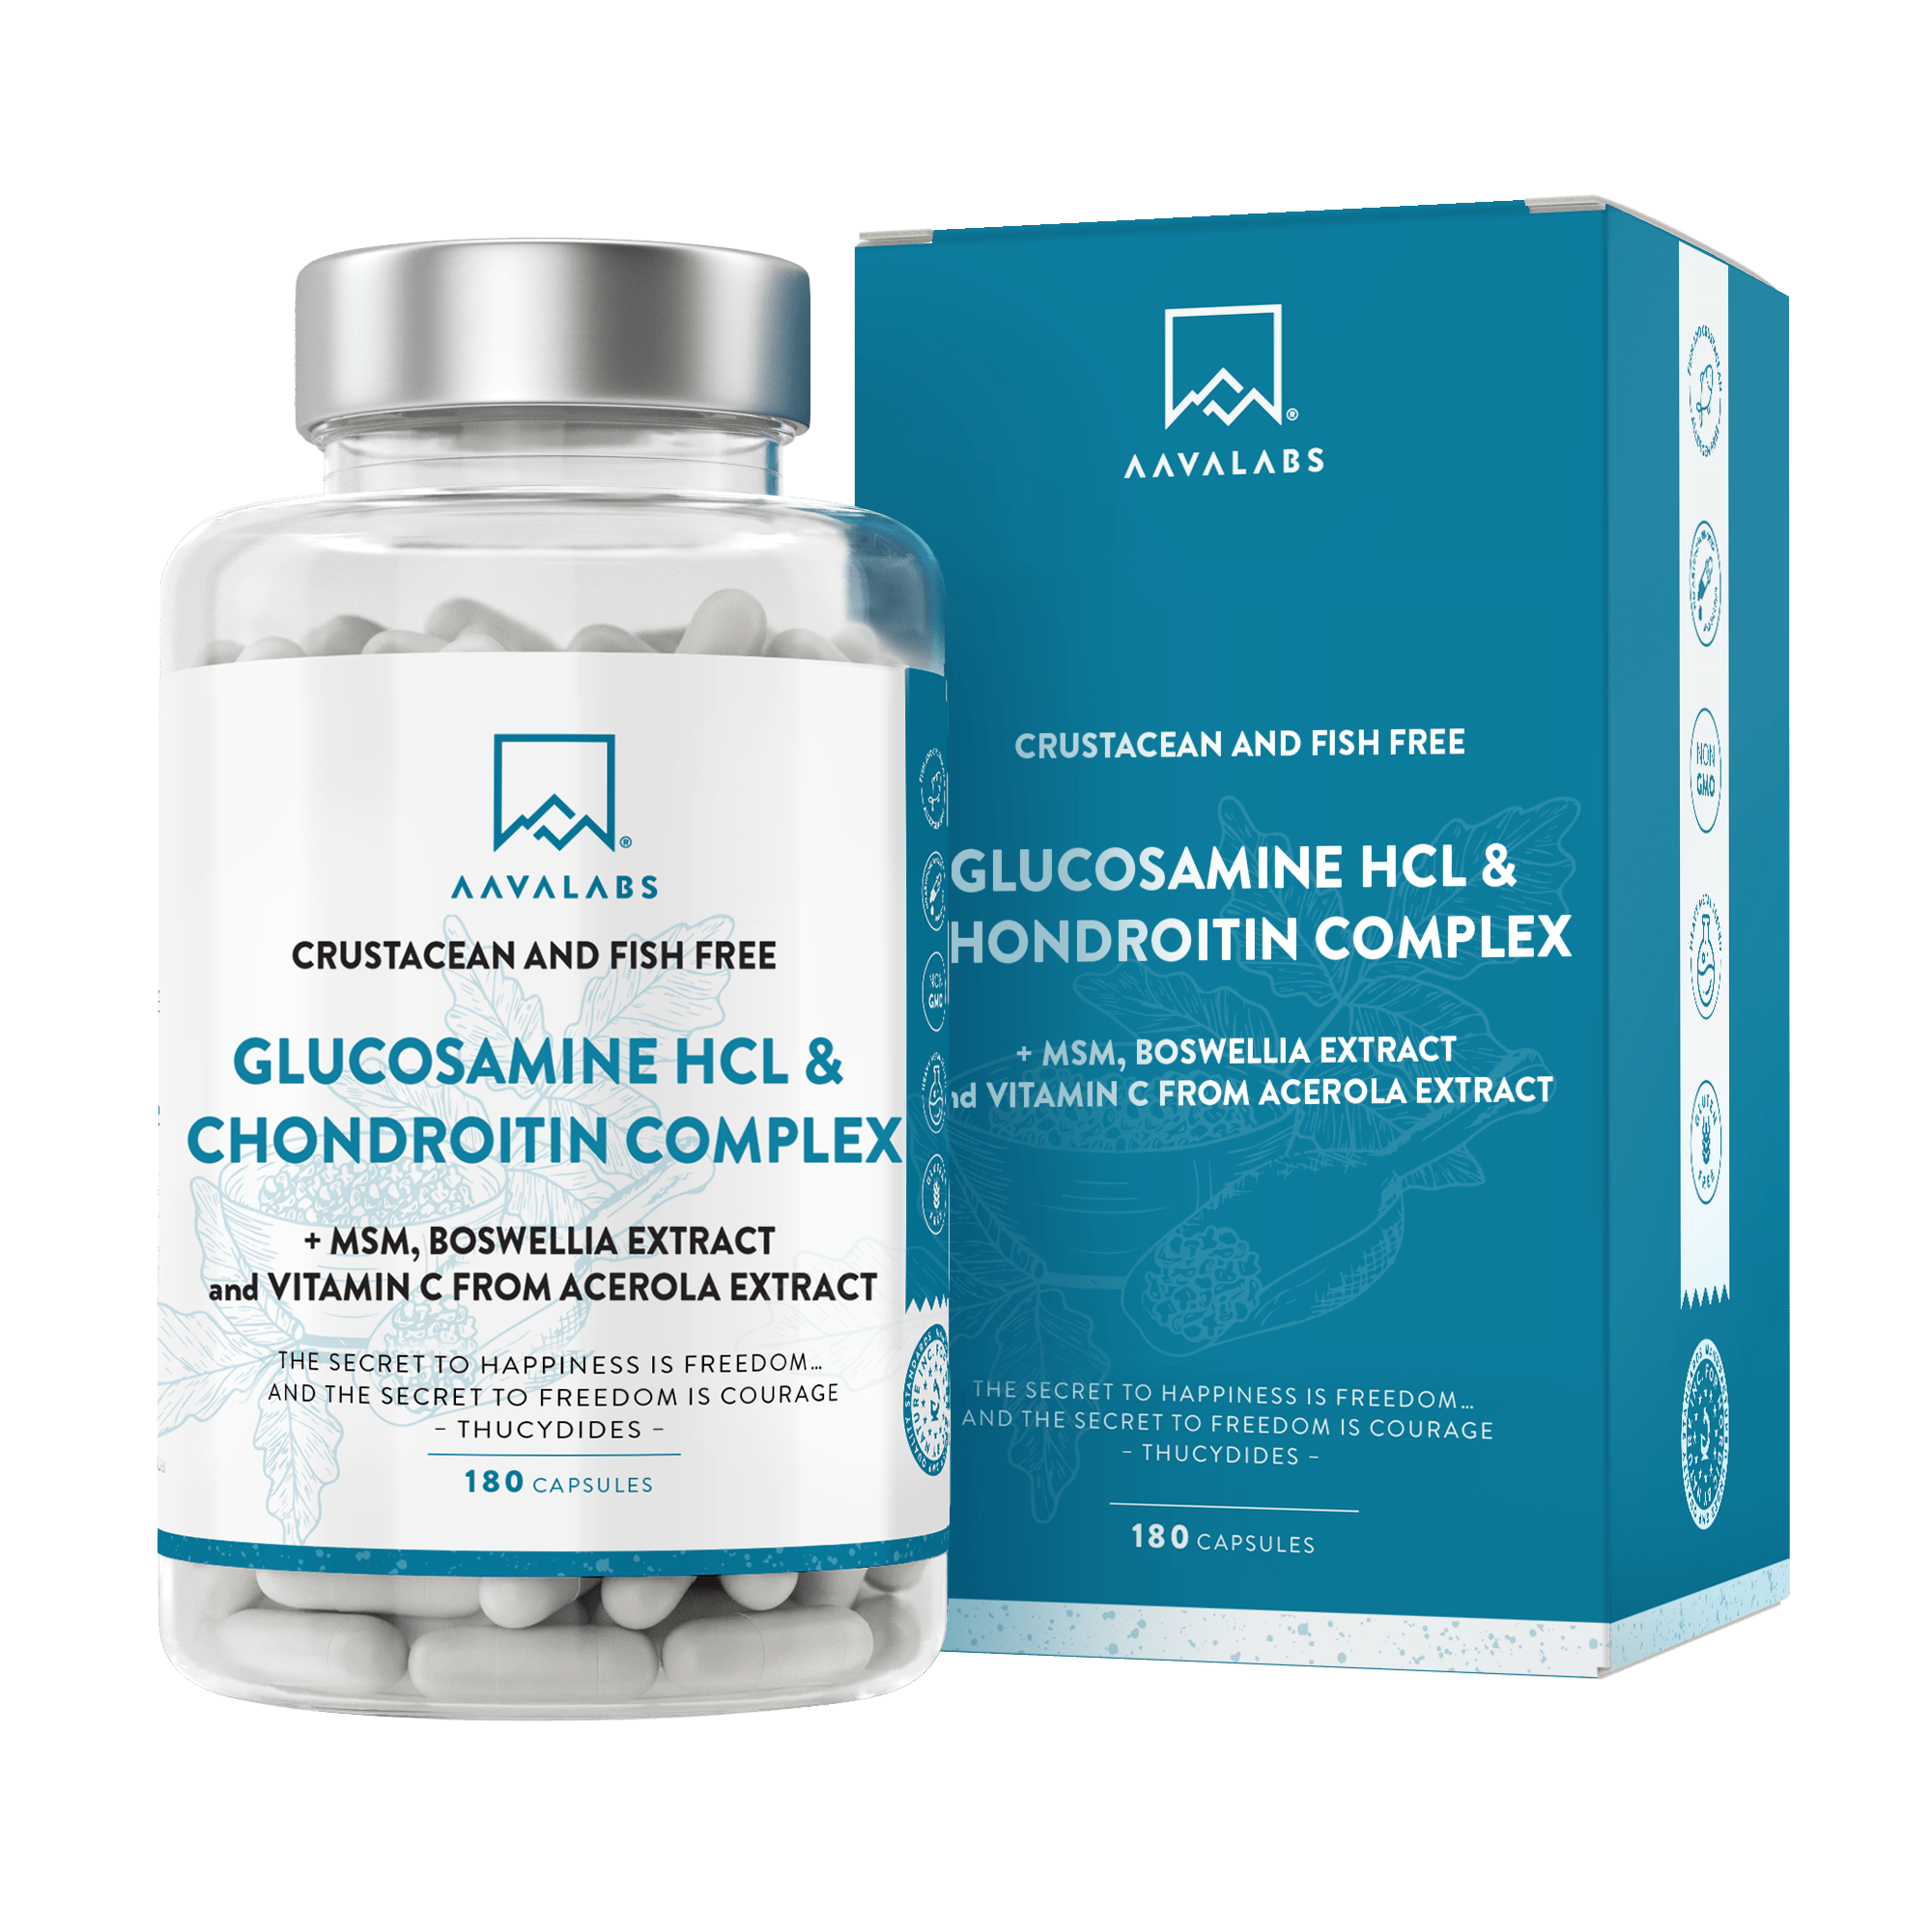 Image of Aavalabs Glucosamine HCL & Chondroitin Complex supplement - AAVALABS